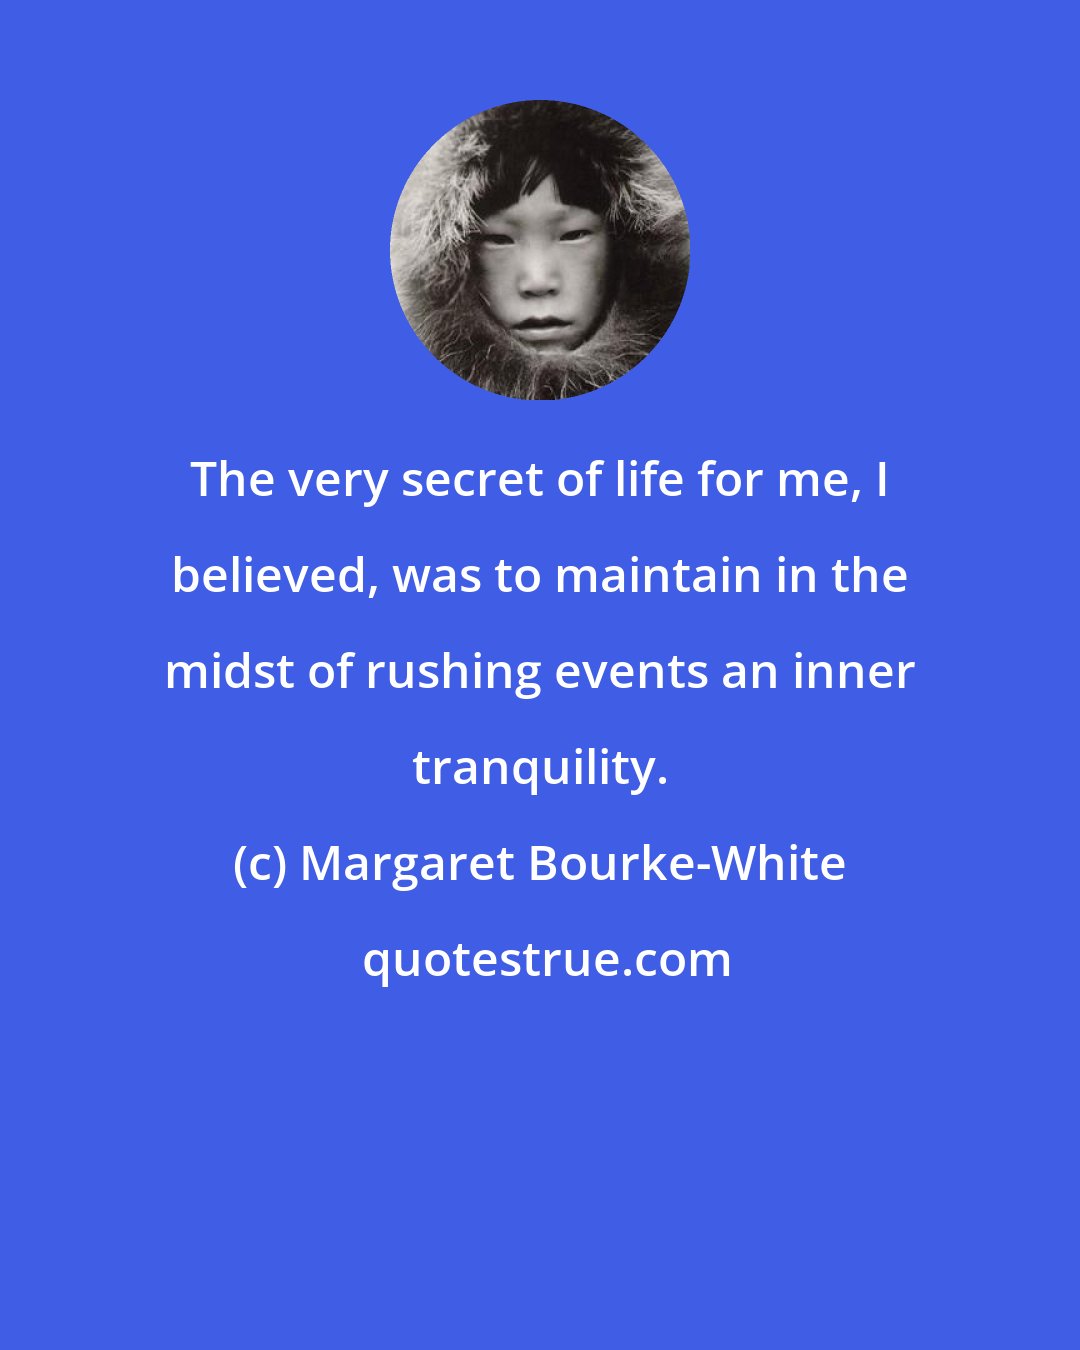 Margaret Bourke-White: The very secret of life for me, I believed, was to maintain in the midst of rushing events an inner tranquility.